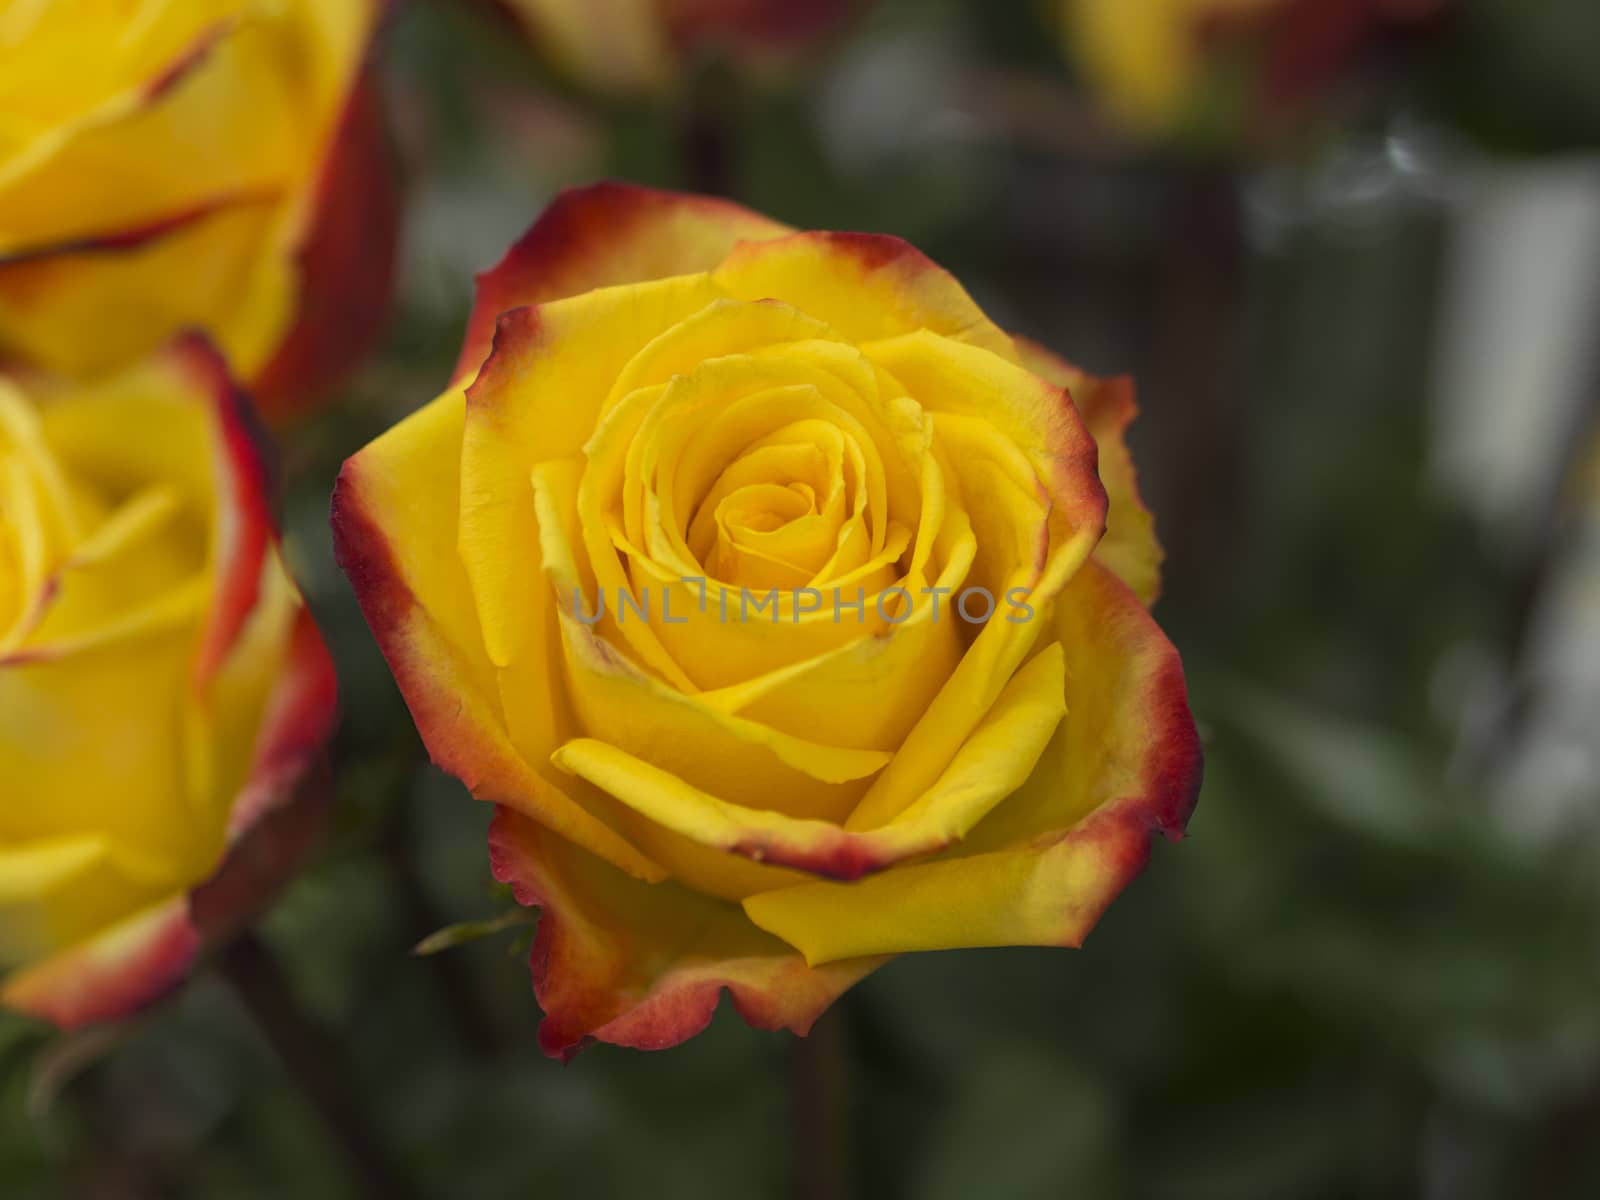 ckose up blooming yellow rose with red border on the flower leaves by Henkeova